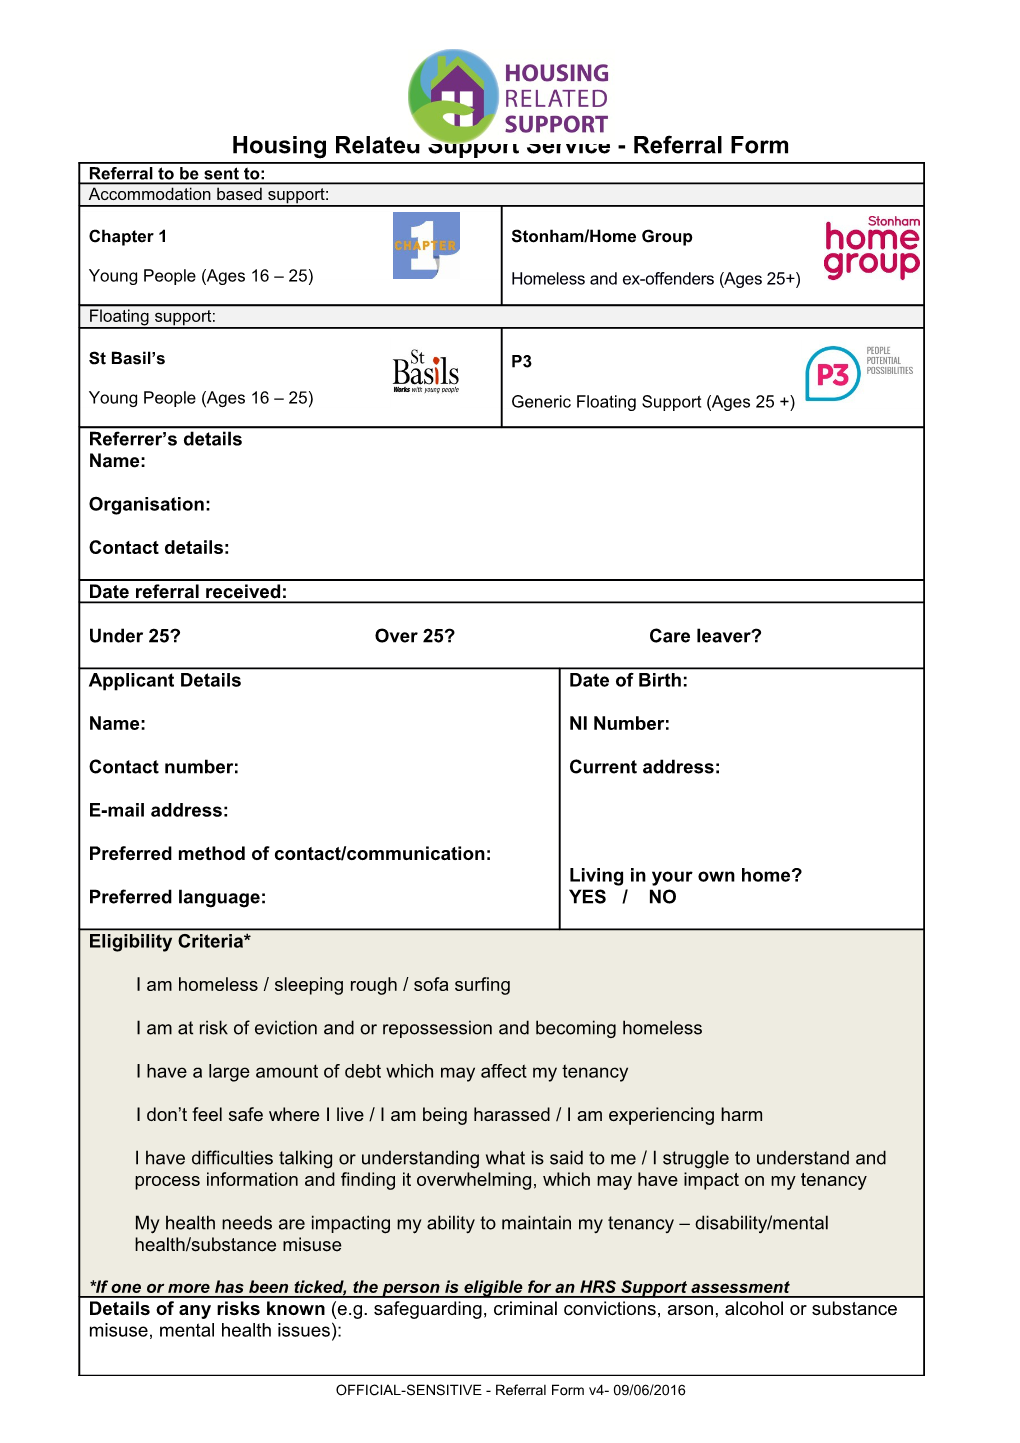 Housing Related Support Service - Referral Form